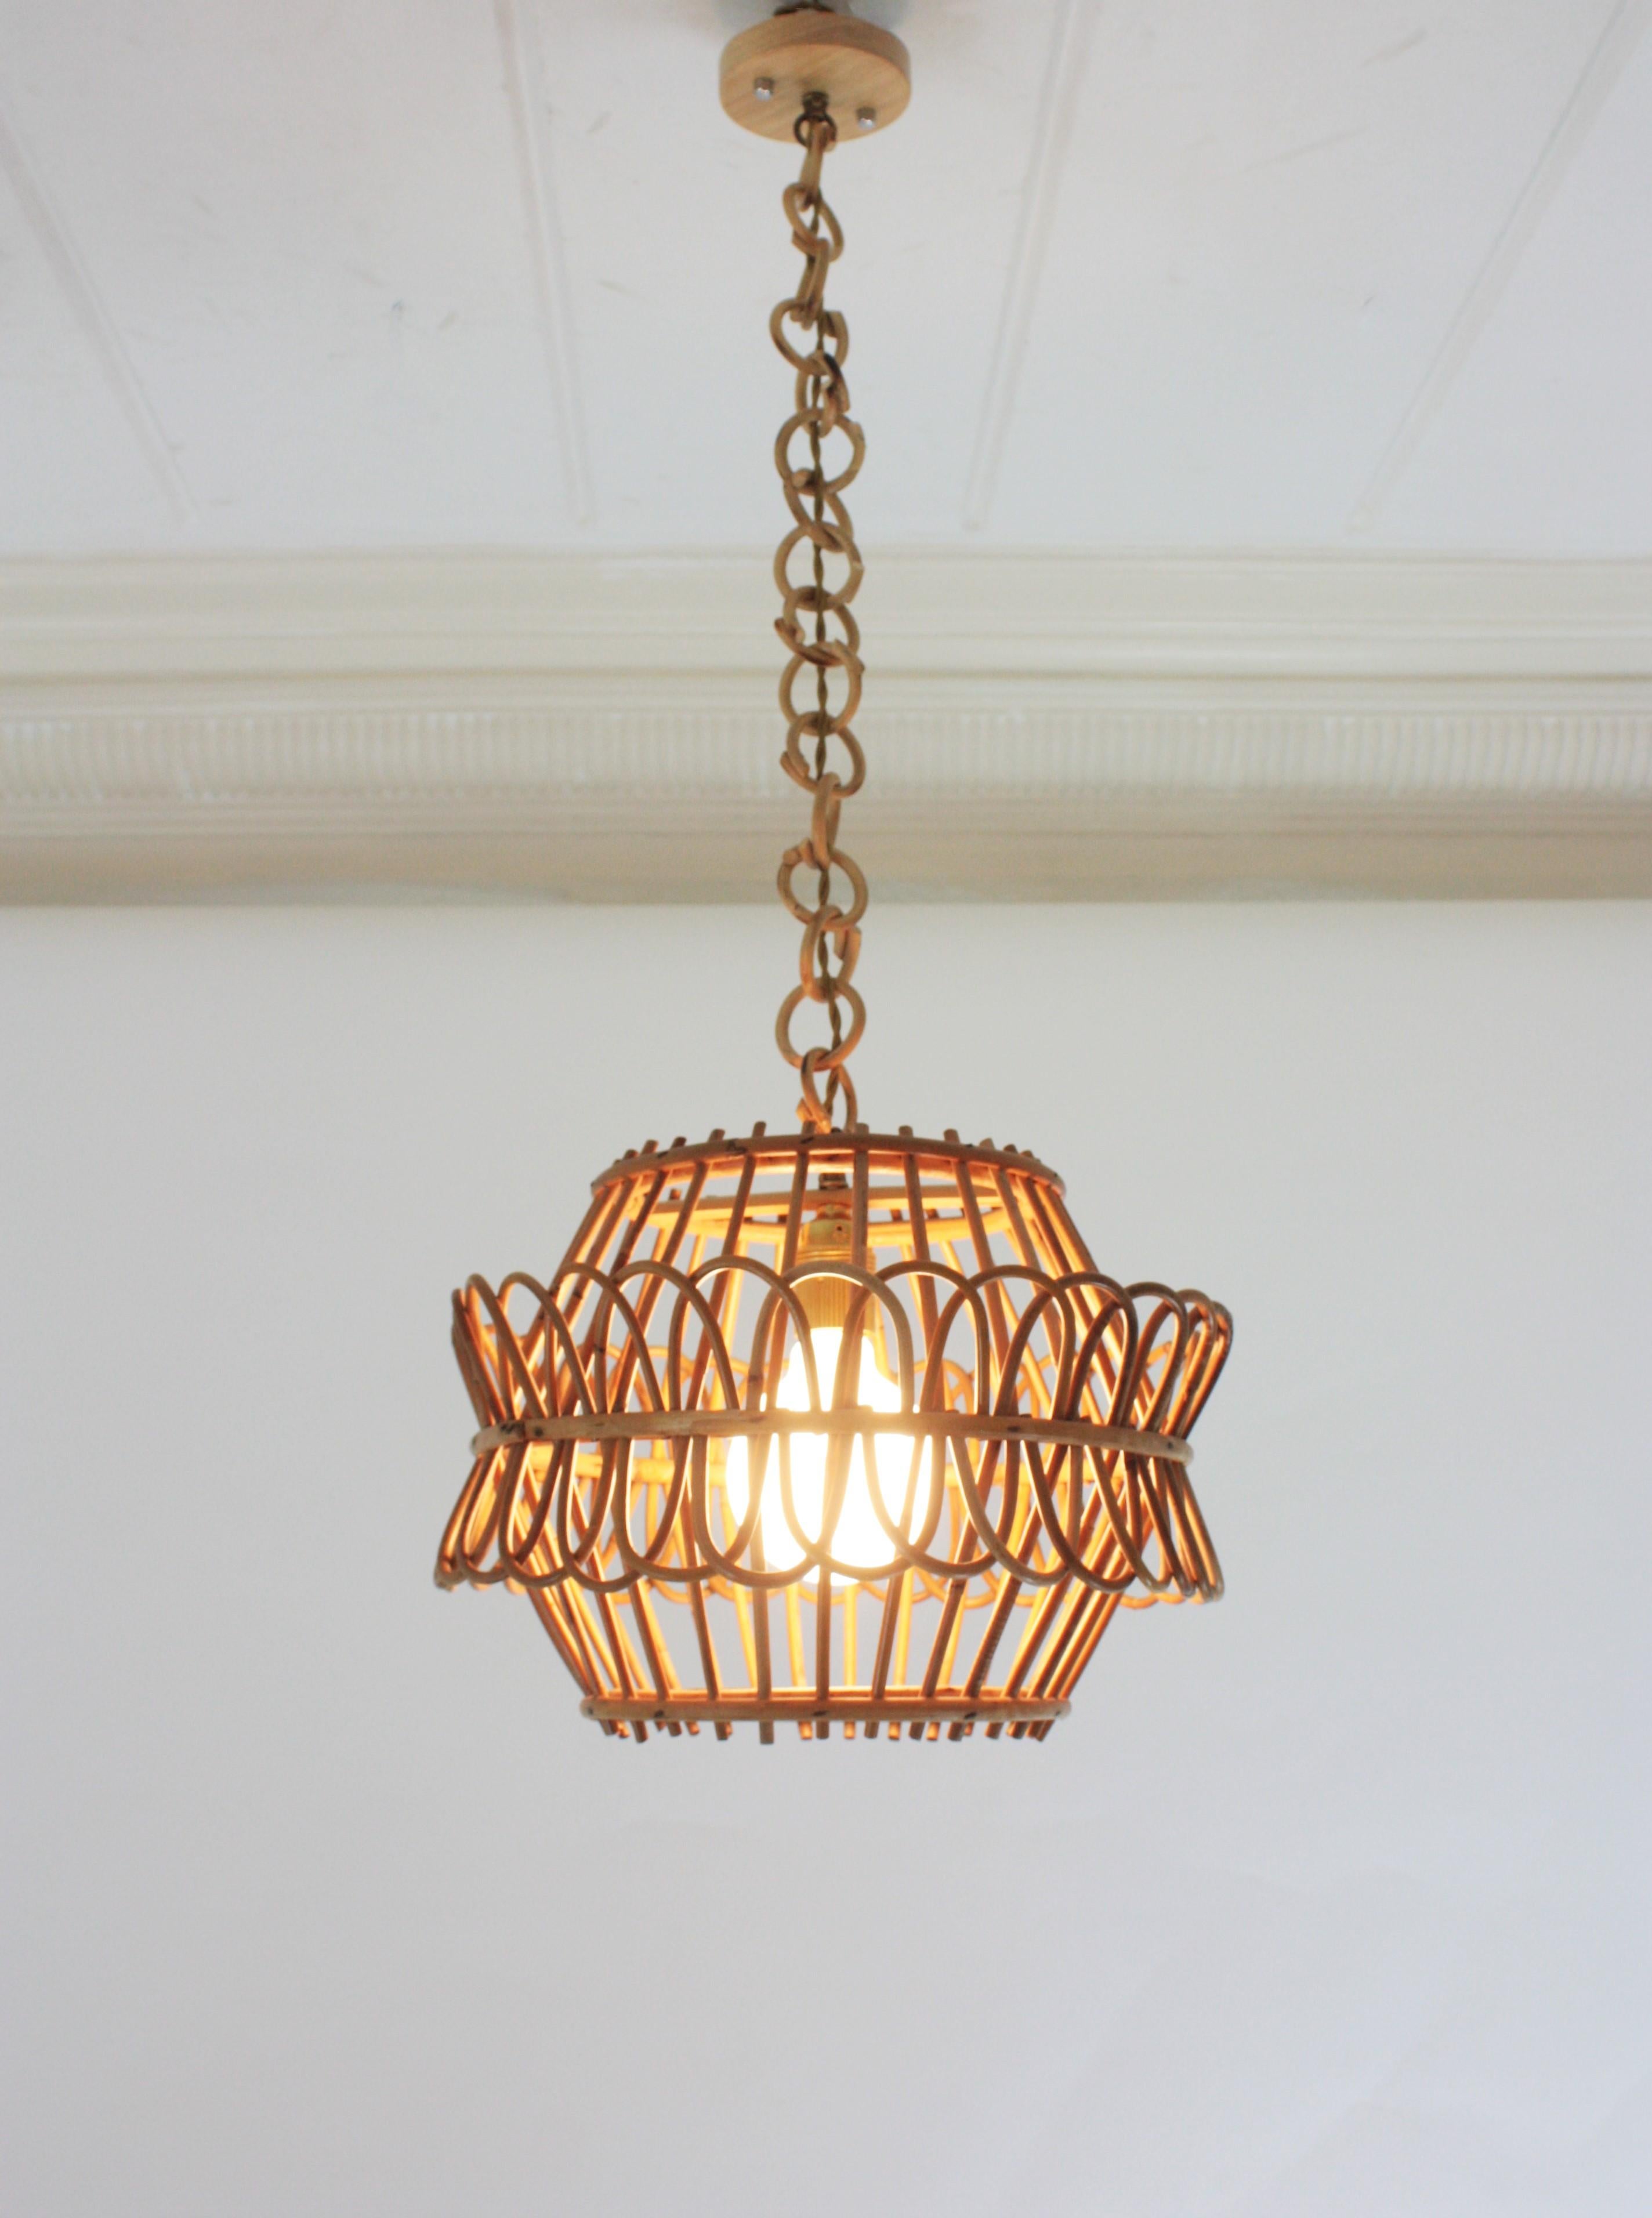 French Pendant Light or Lantern in Rattan, 1950s For Sale 8